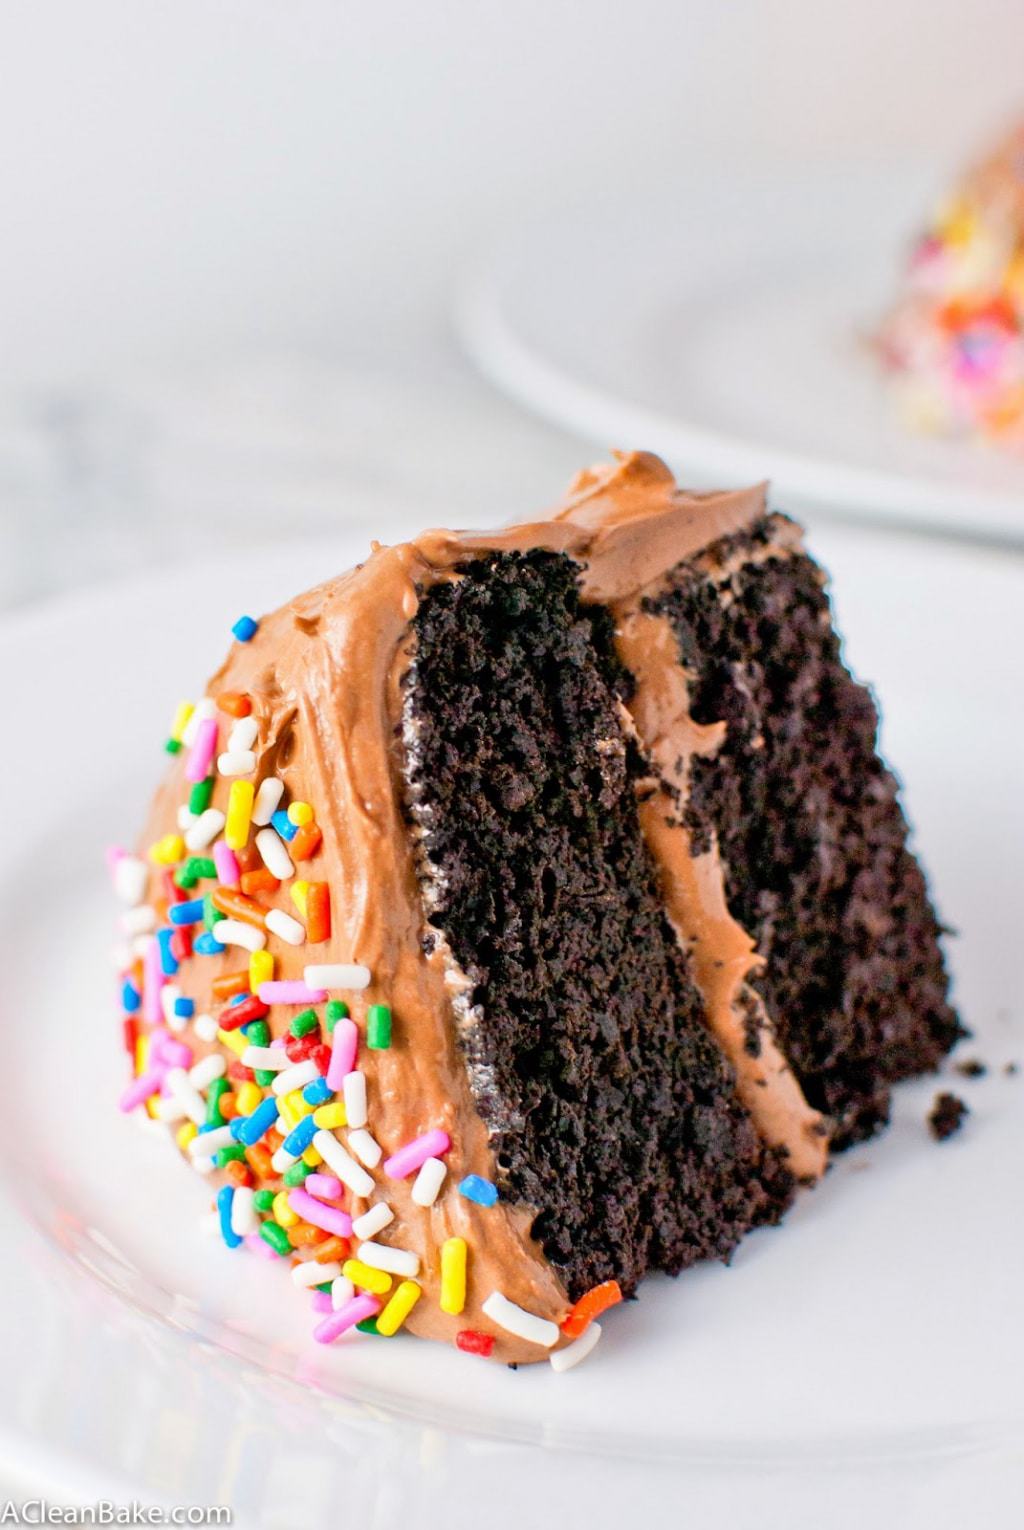 Secretly healthy gluten-free layer cake. You'll never know it's gluten-free!